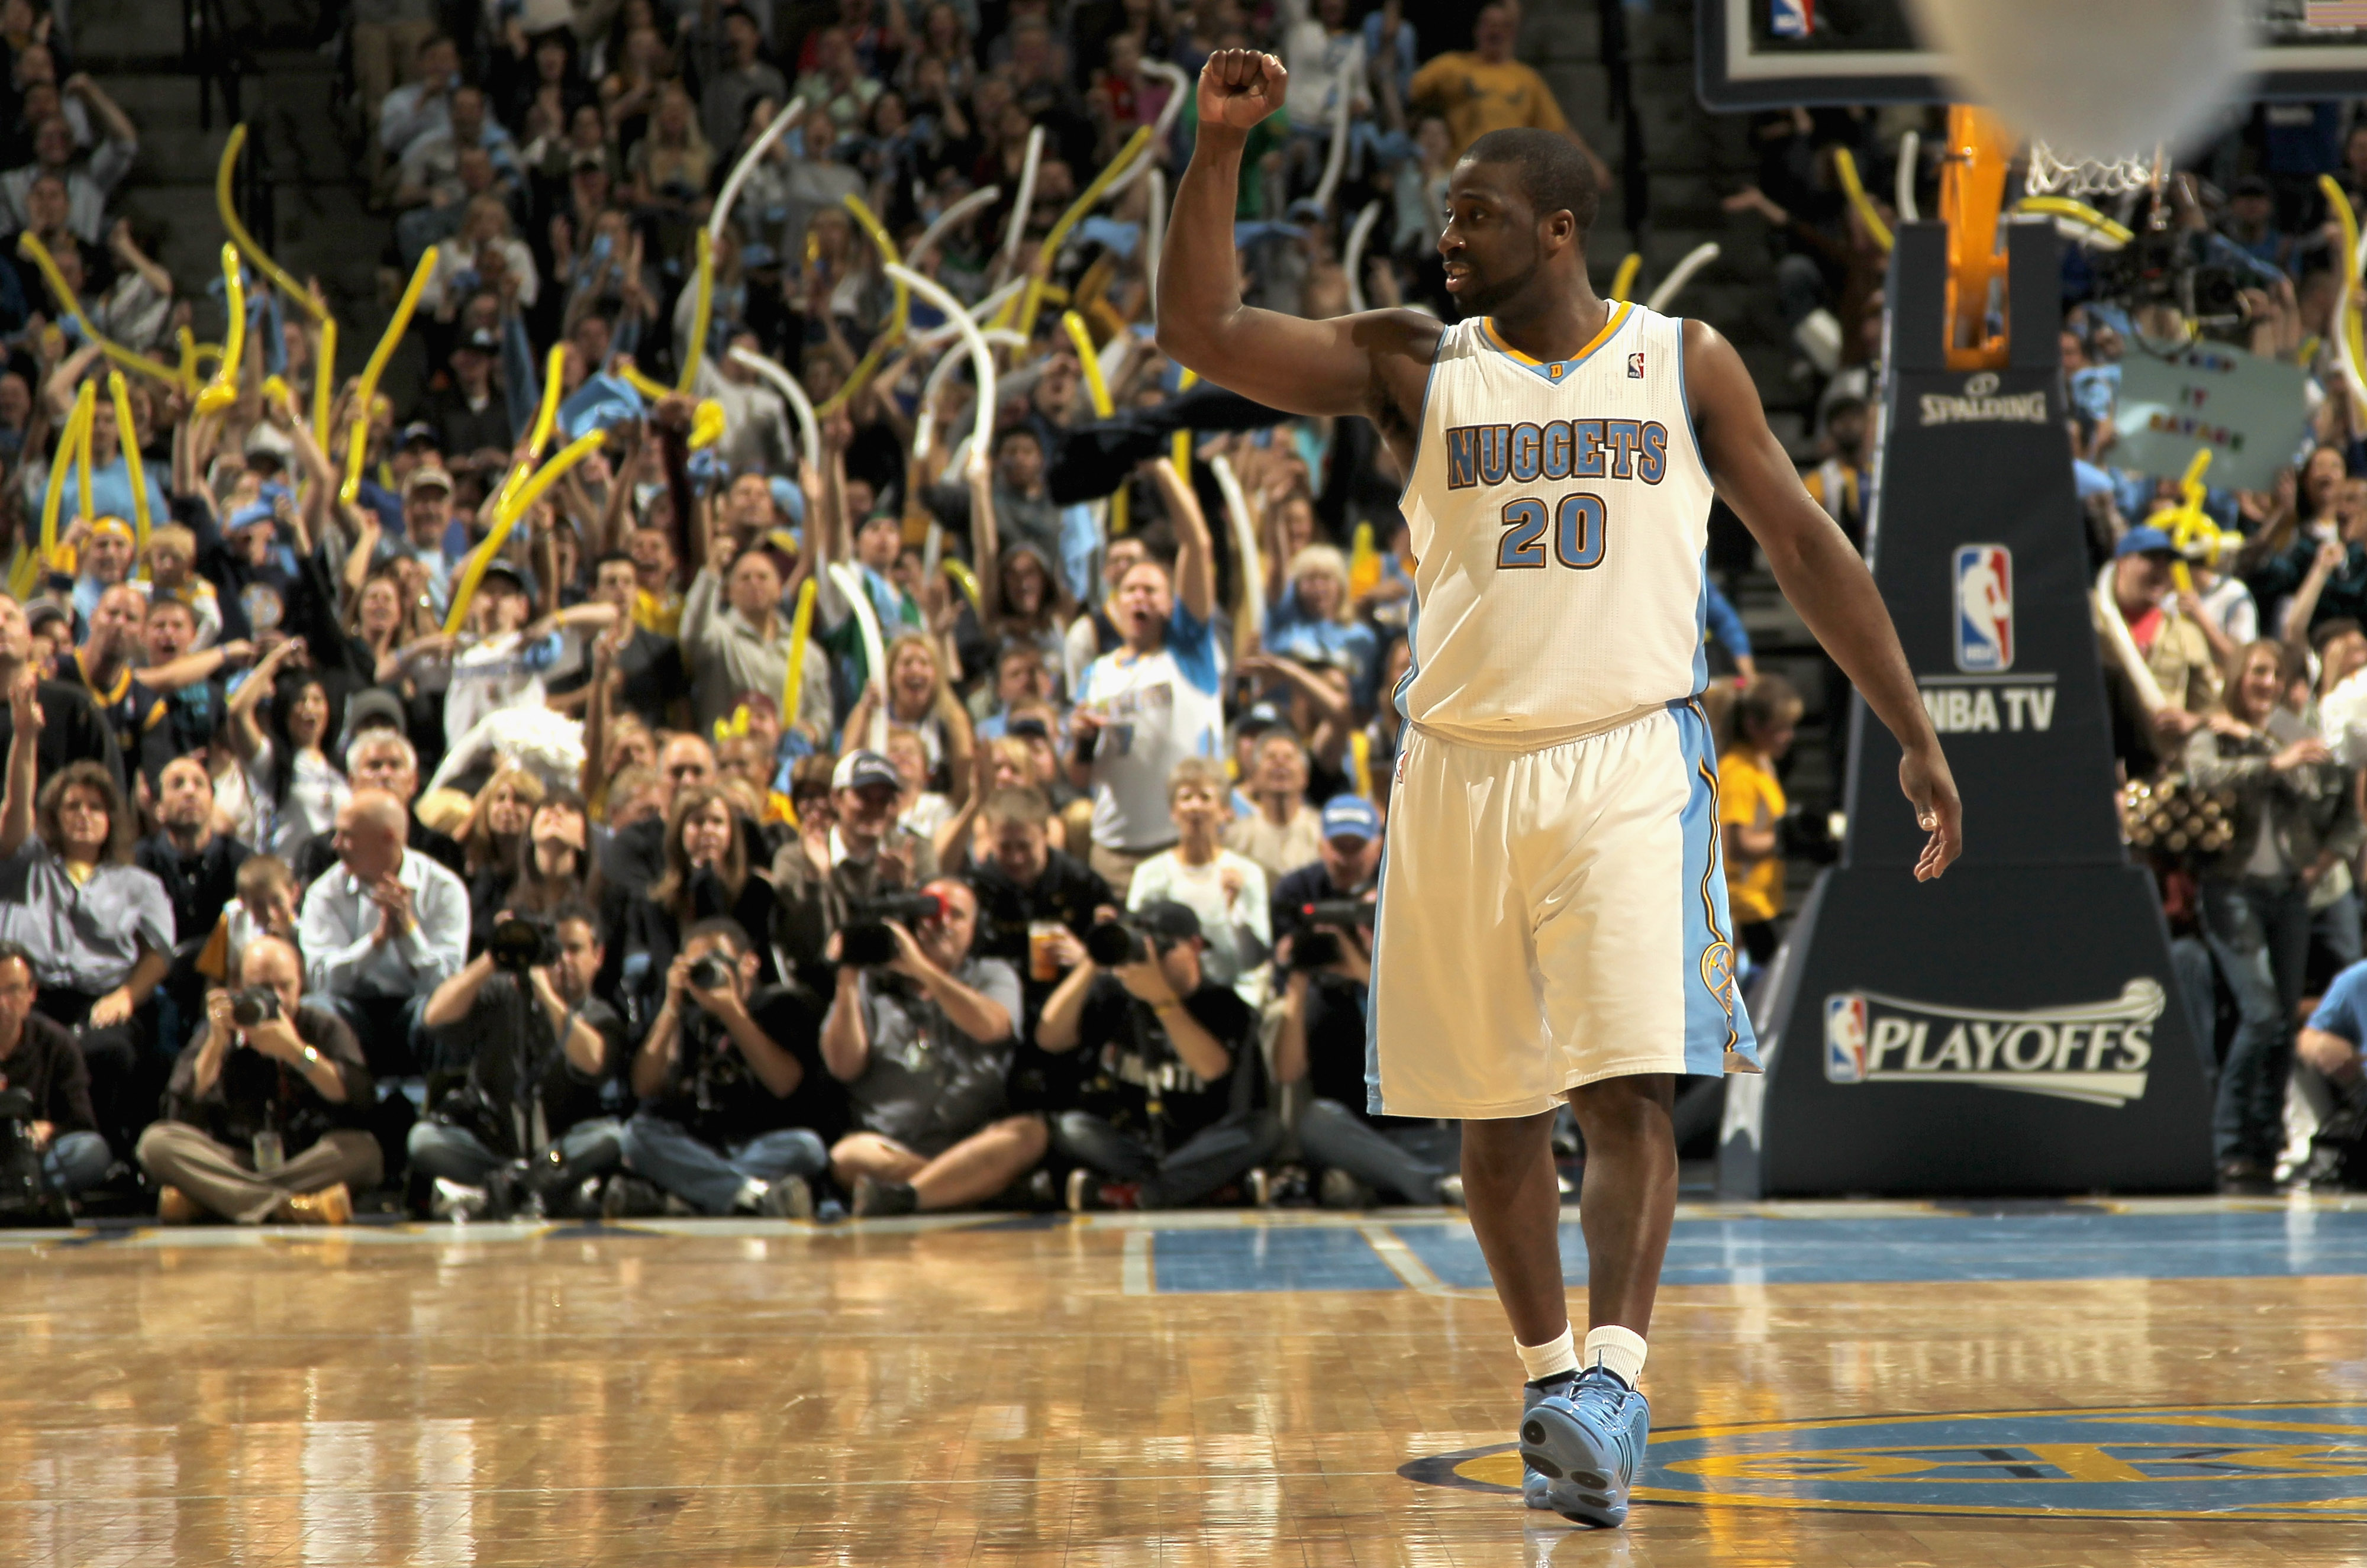 DENVER, CO - APRIL 25:  Raymond Felton #20 of the Denver Nuggets celebrates late in the fourth quarter against the Oklahoma City Thunder in Game Four of the Western Conference Quarterfinals in the 2011 NBA Playoffs on April 24, 2011 at the Pepsi Center in